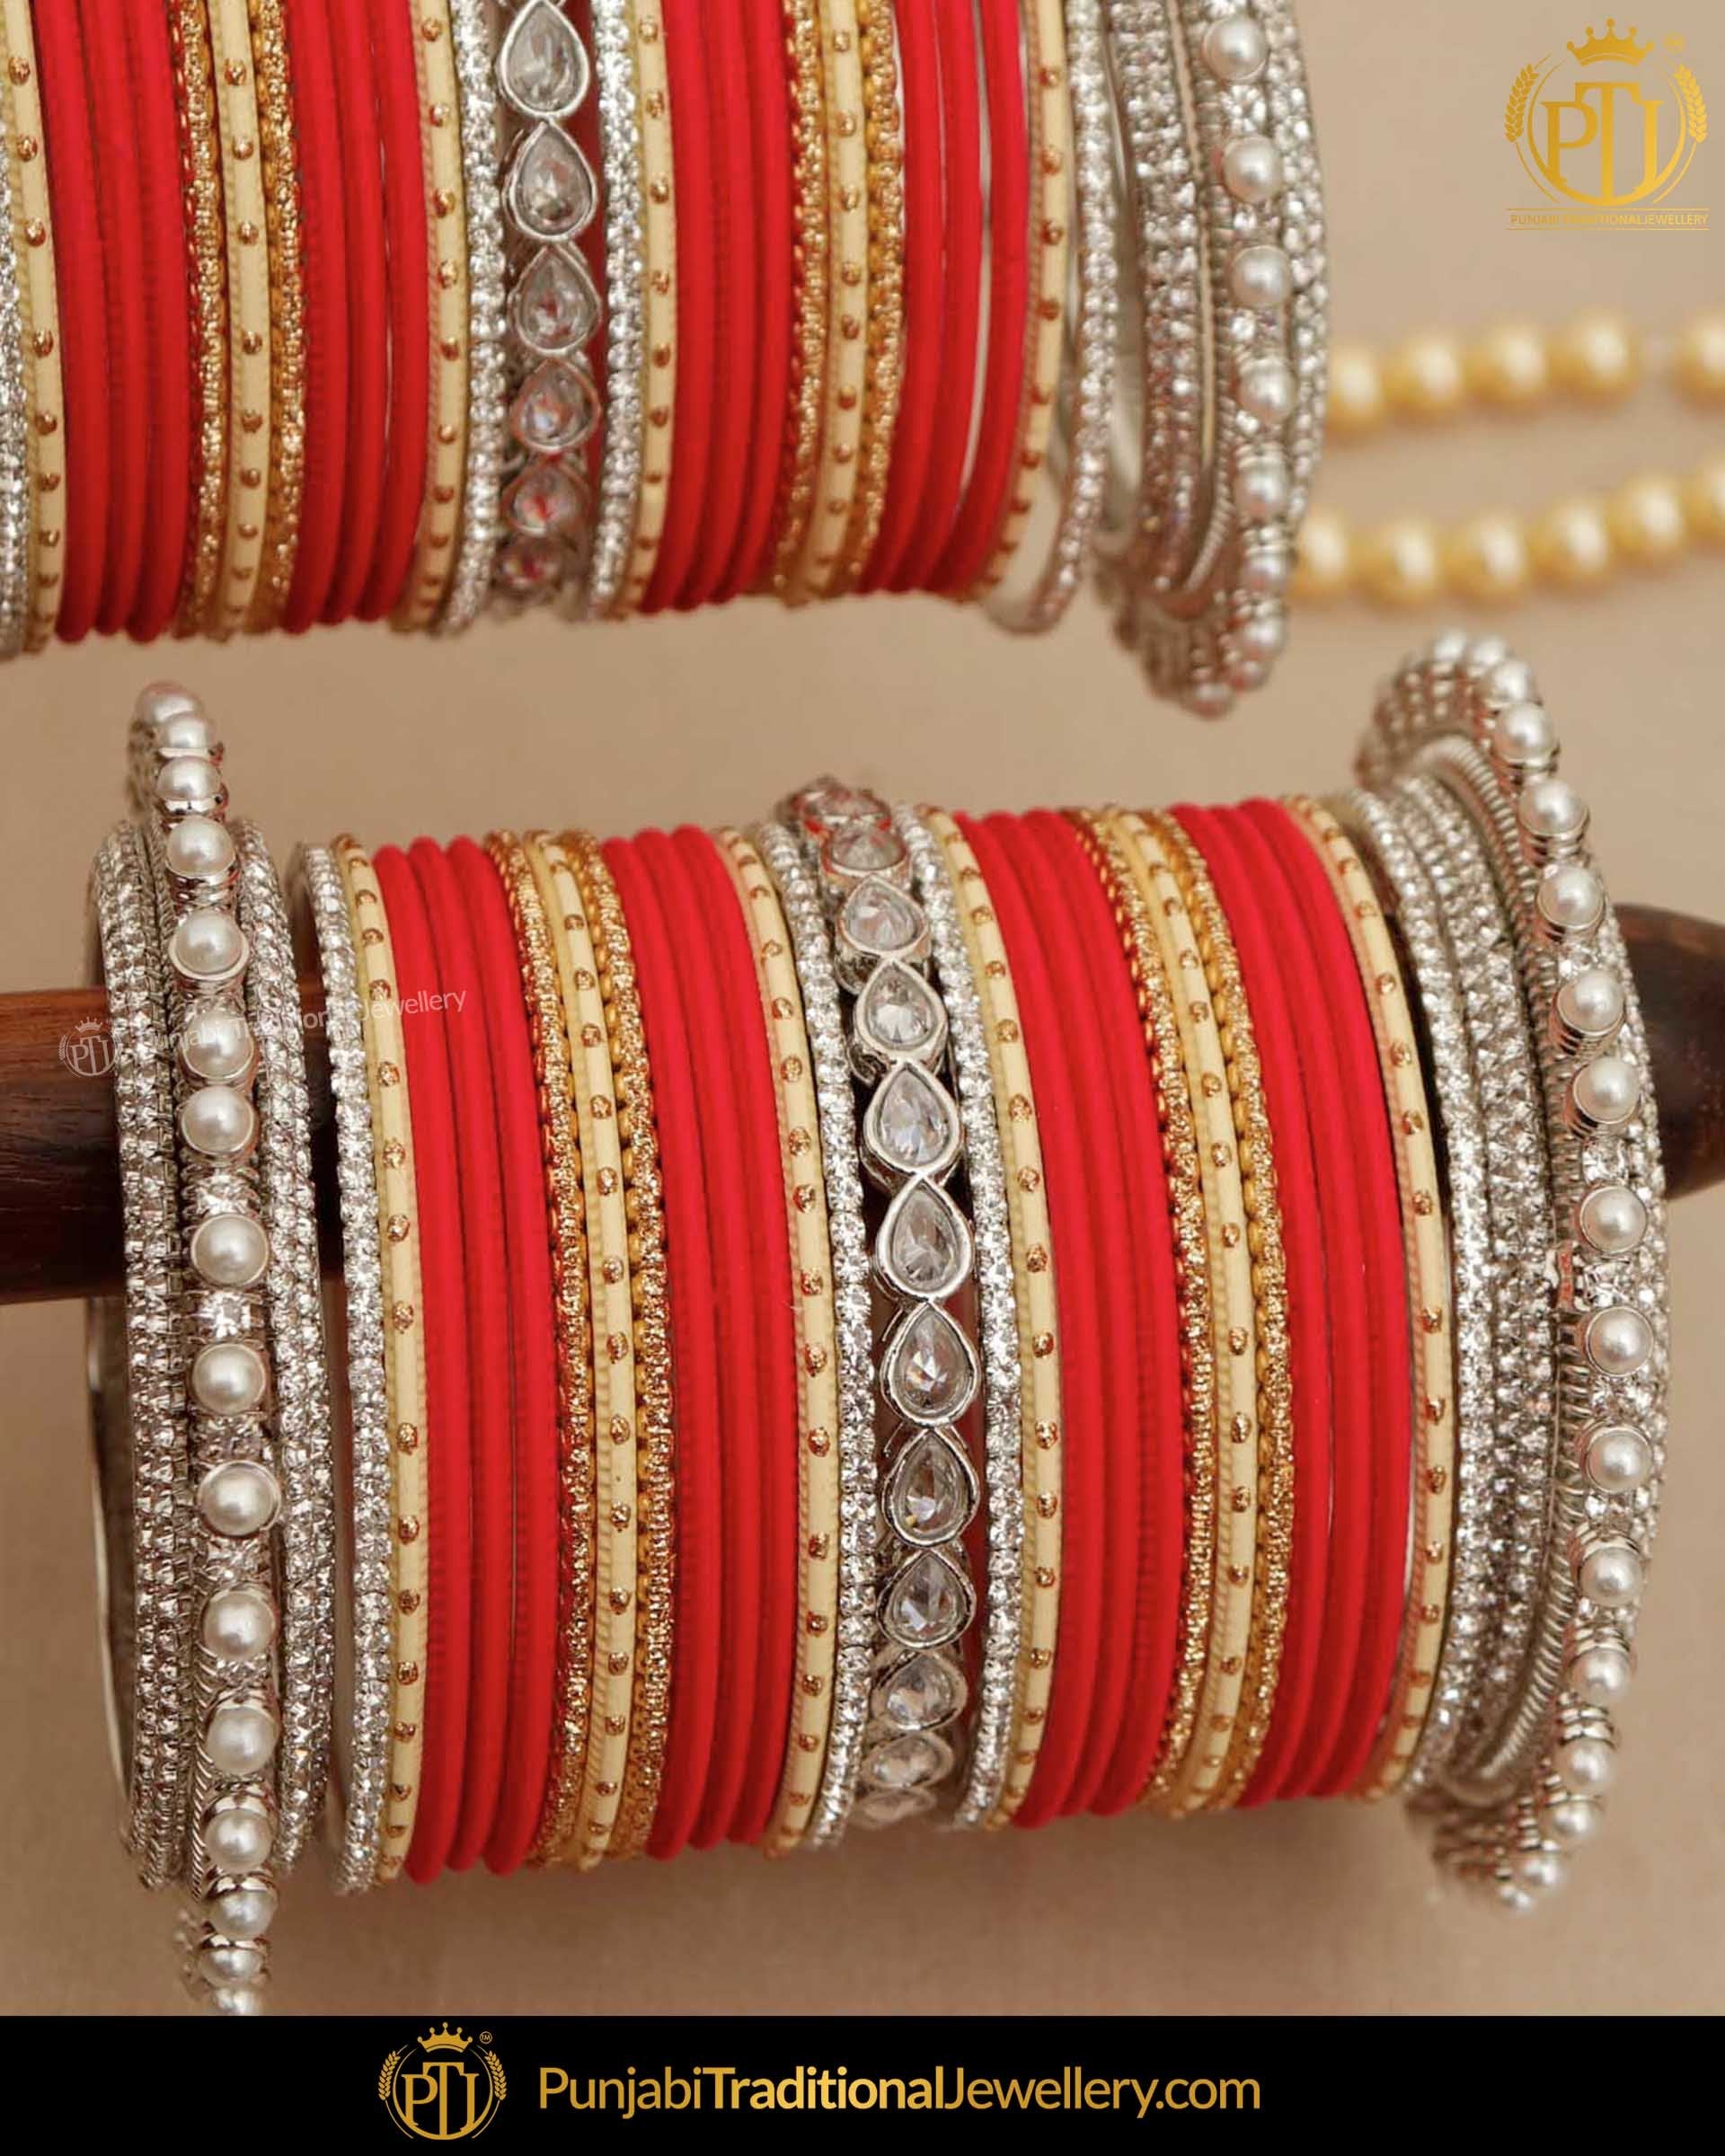 Red & Silver (For Both Hands) Bangles Set | Punjabi Traditional Jewellery Exclusive